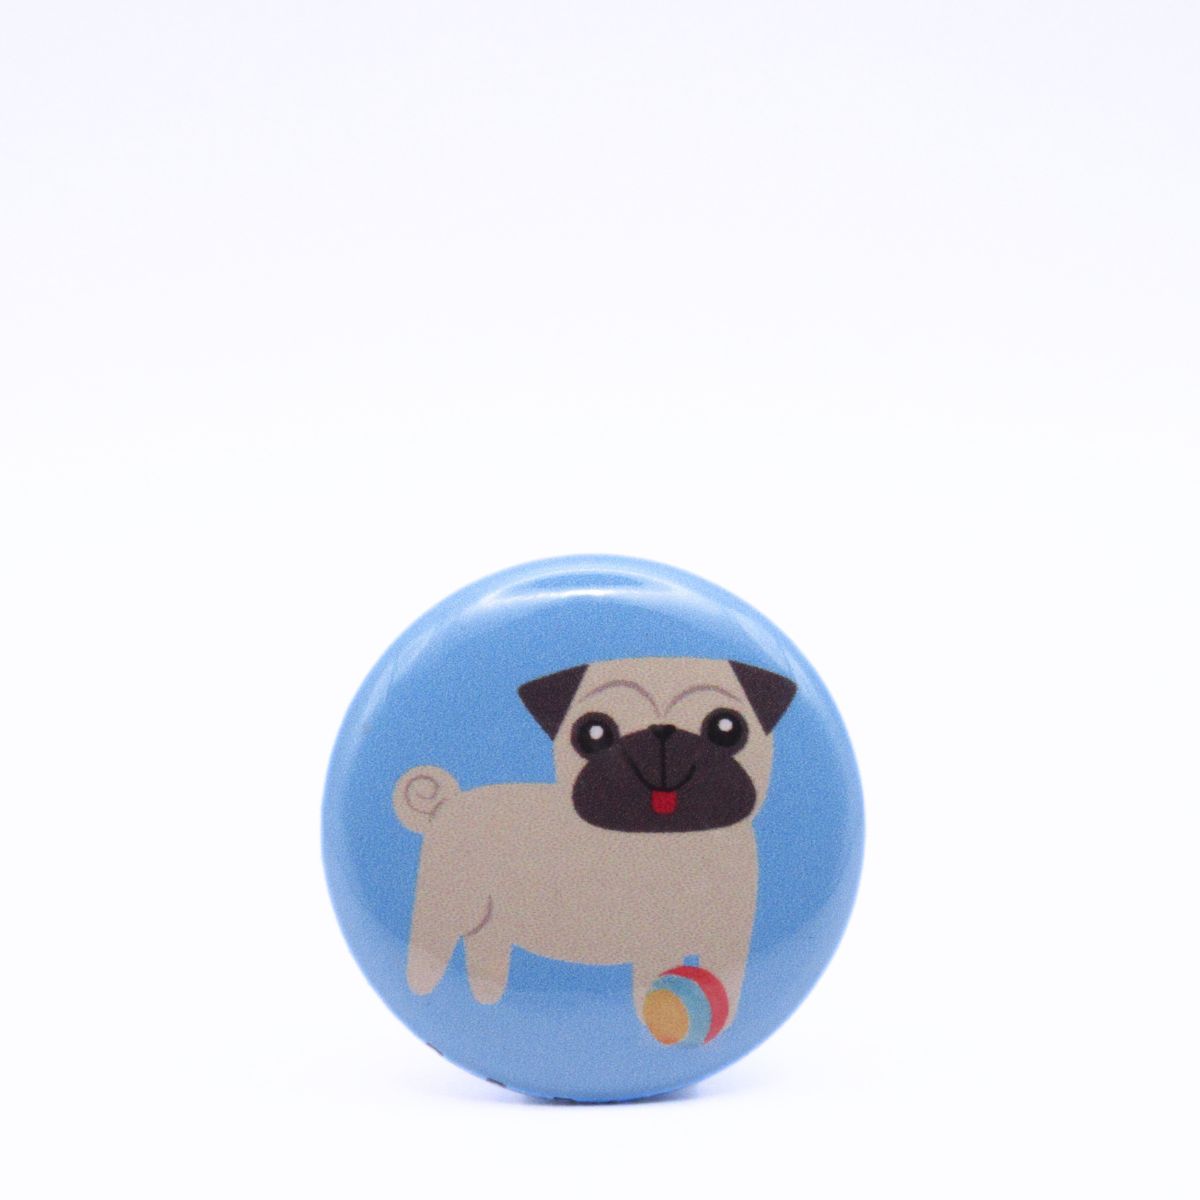 BooBooRoo Pinback Button (i.e. button, badge, pin) of a cute pug with its tongue out and a small ball in front of it